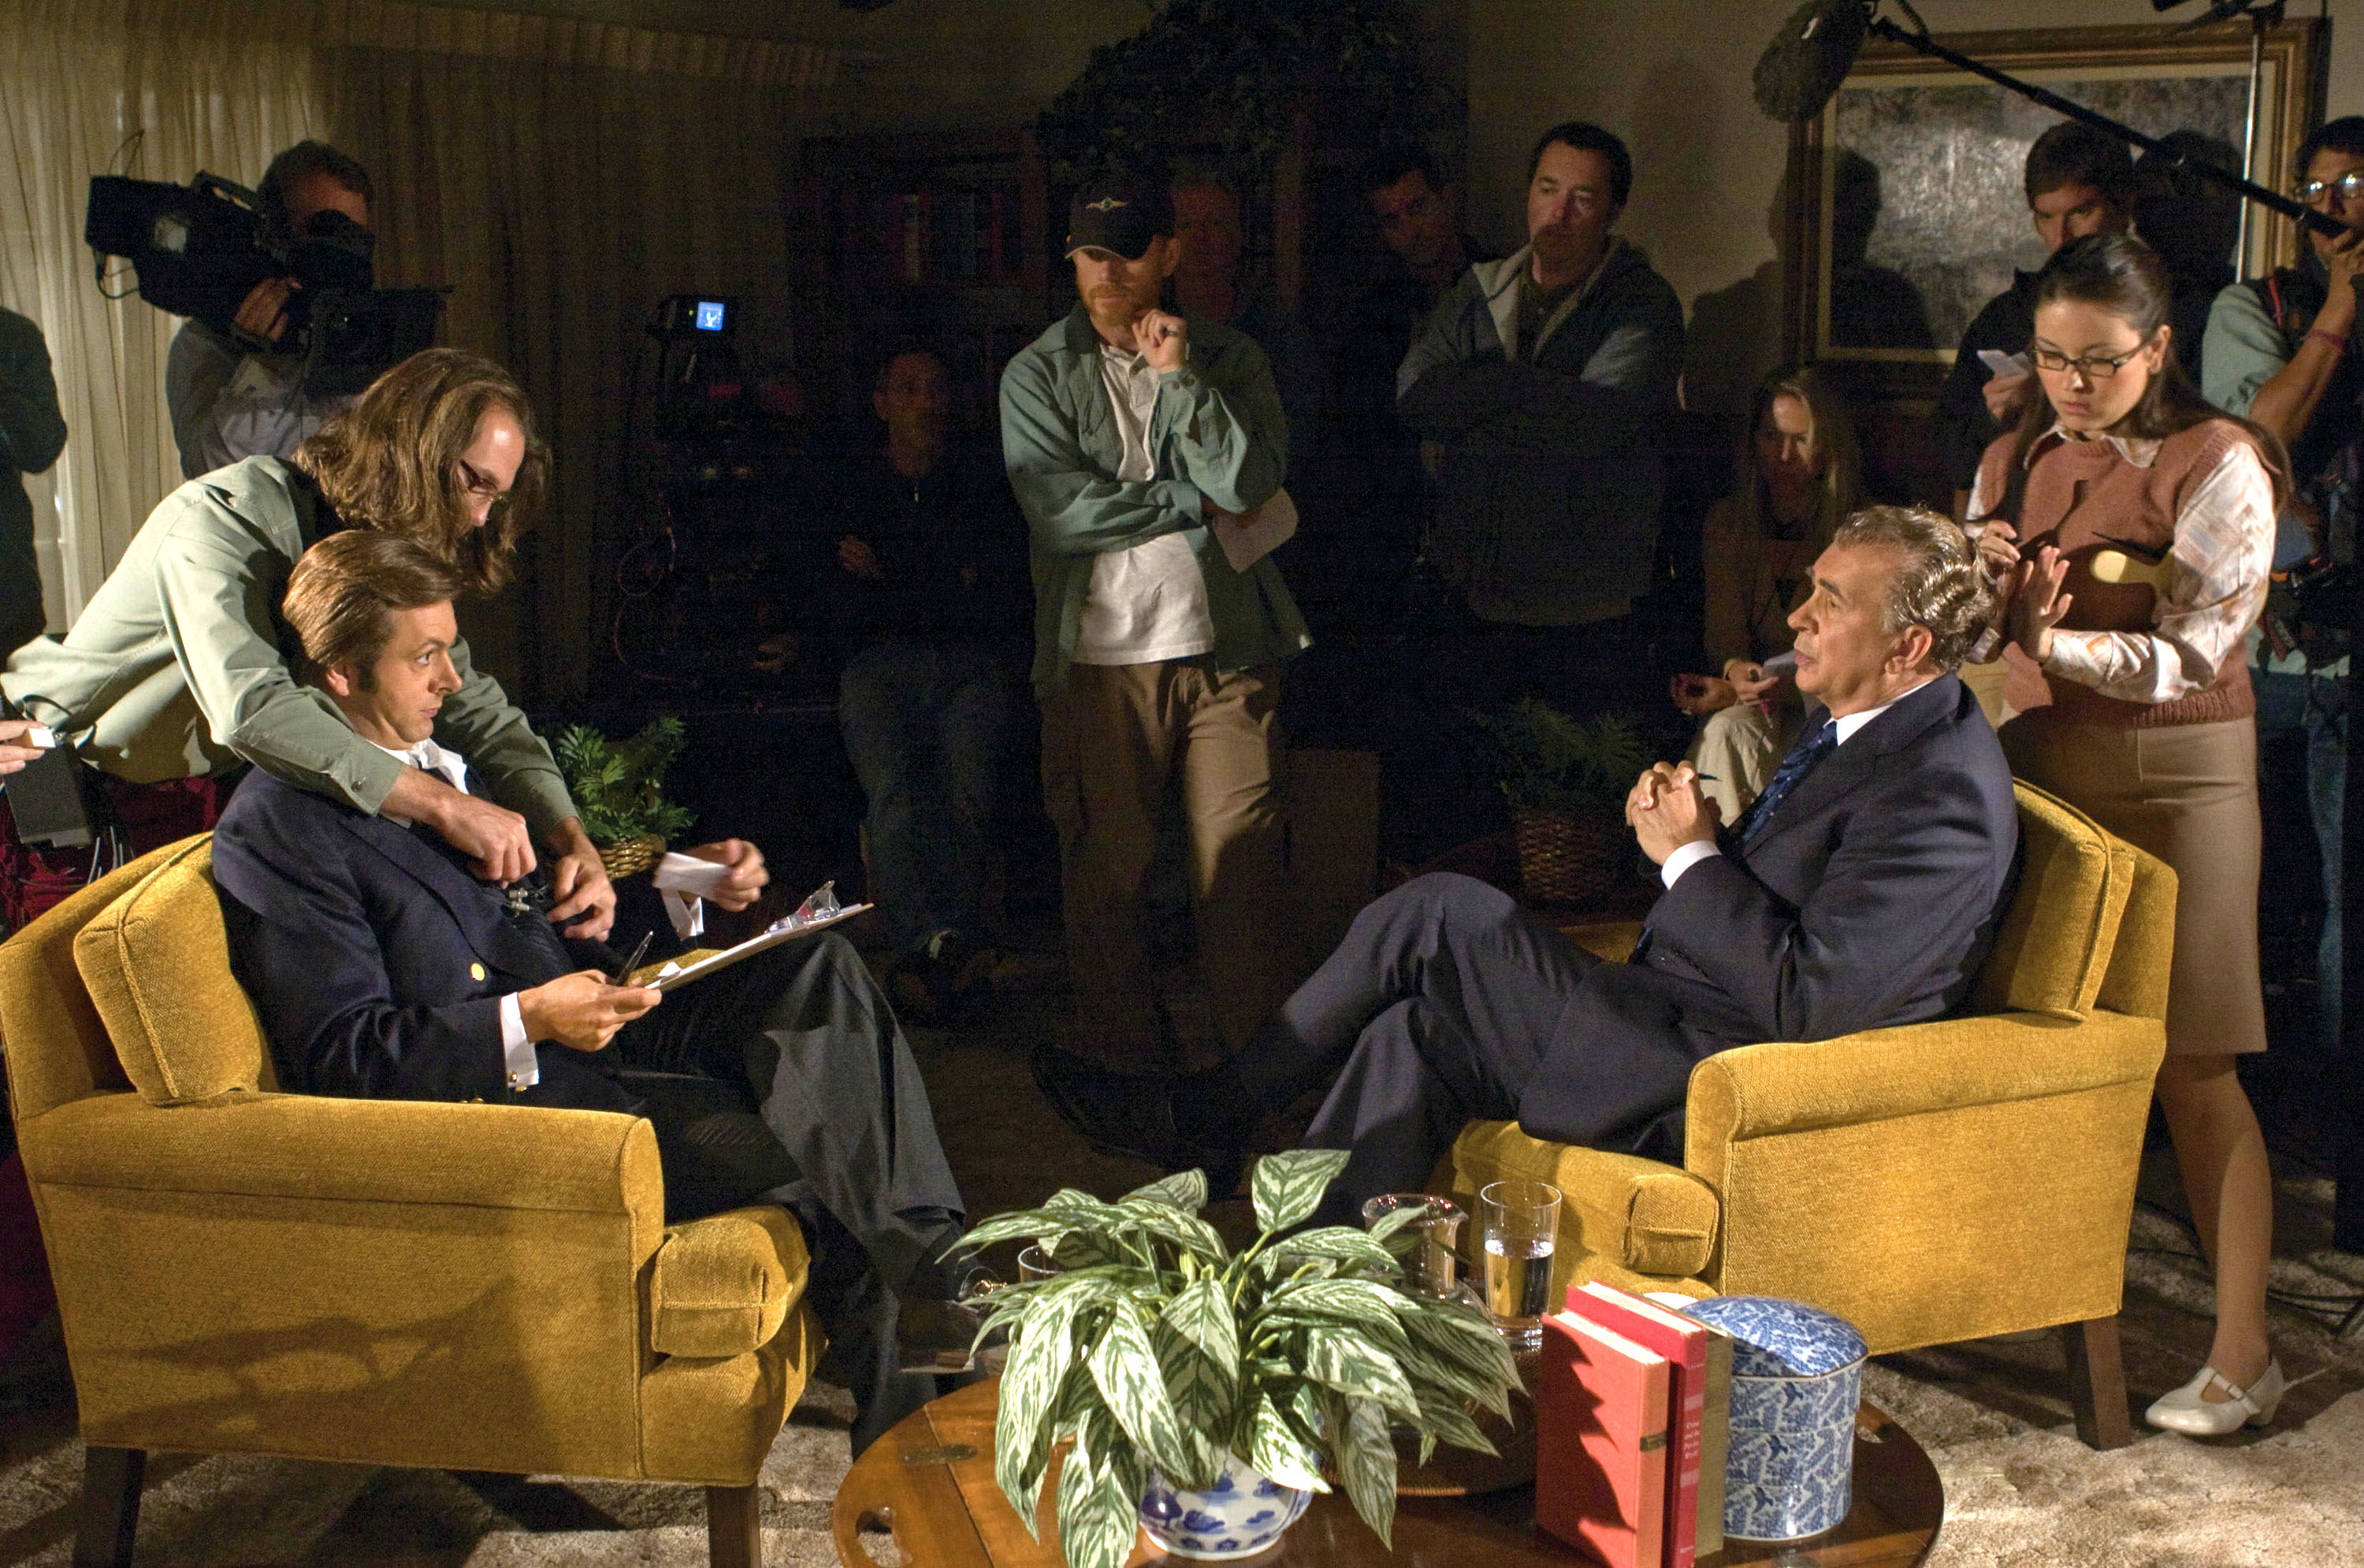 Michael Sheen and Frank Langella sit in chairs preparing for an interview